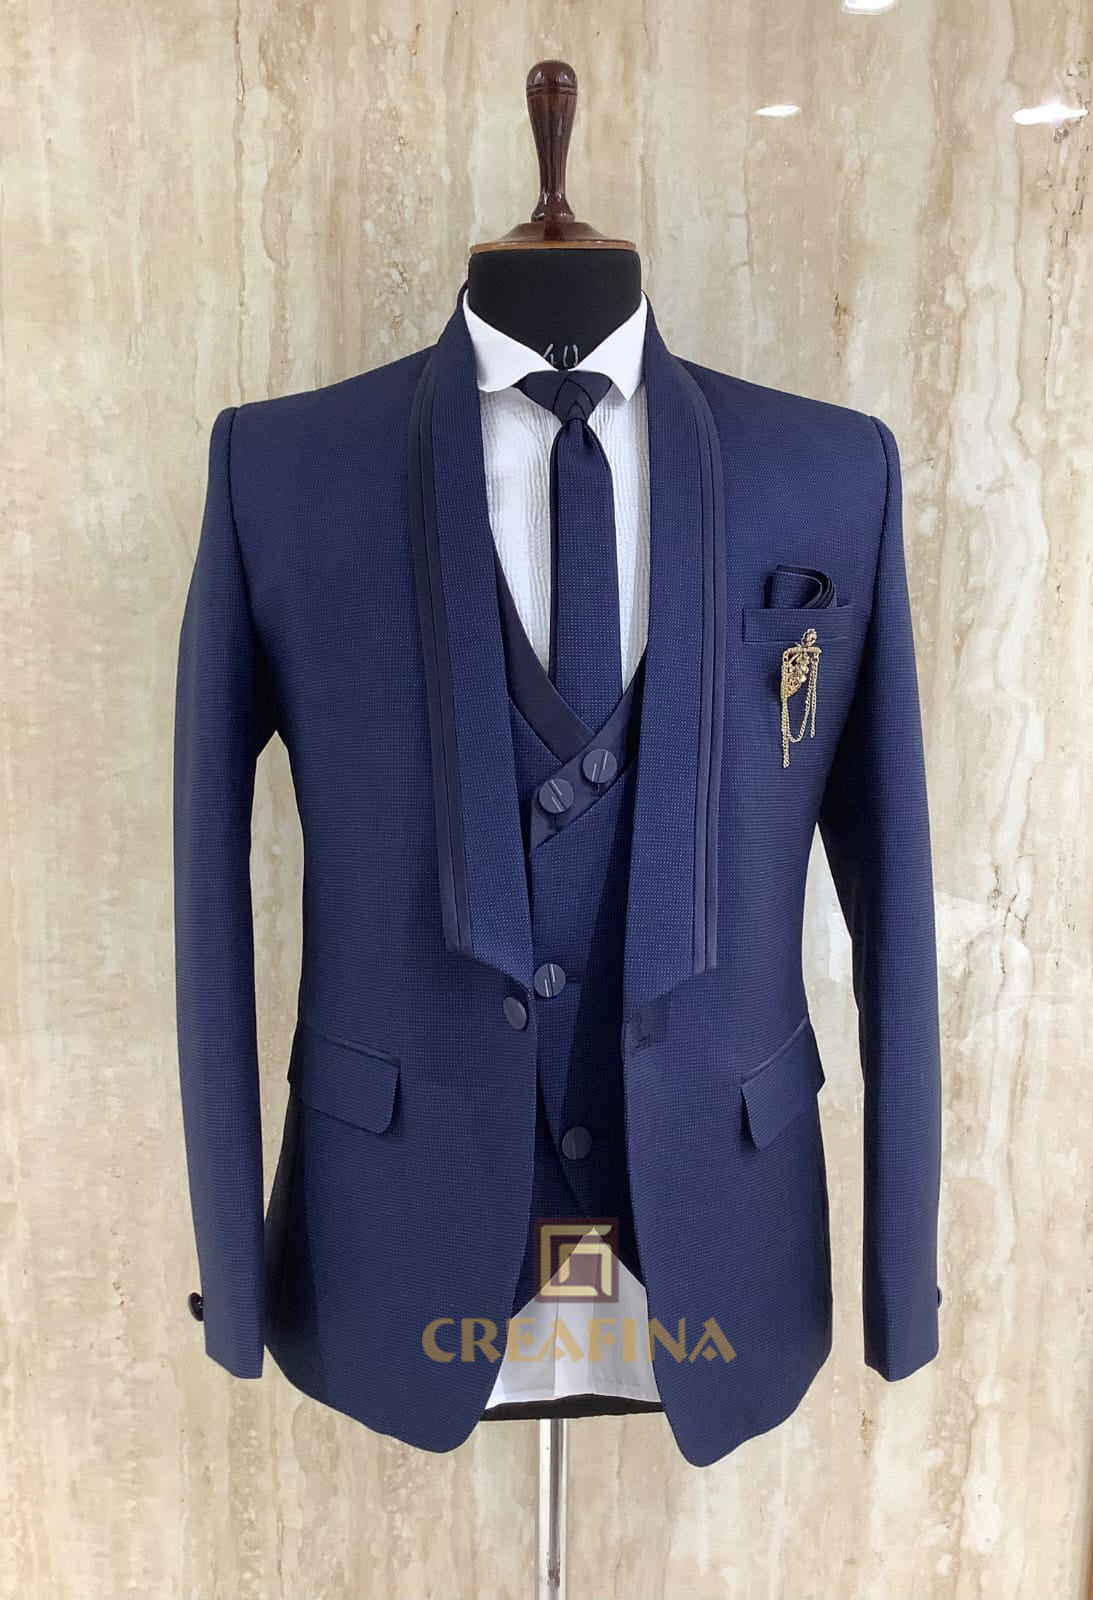 MENS SUIT IN CLASSIC NAVY BLUE COLOR